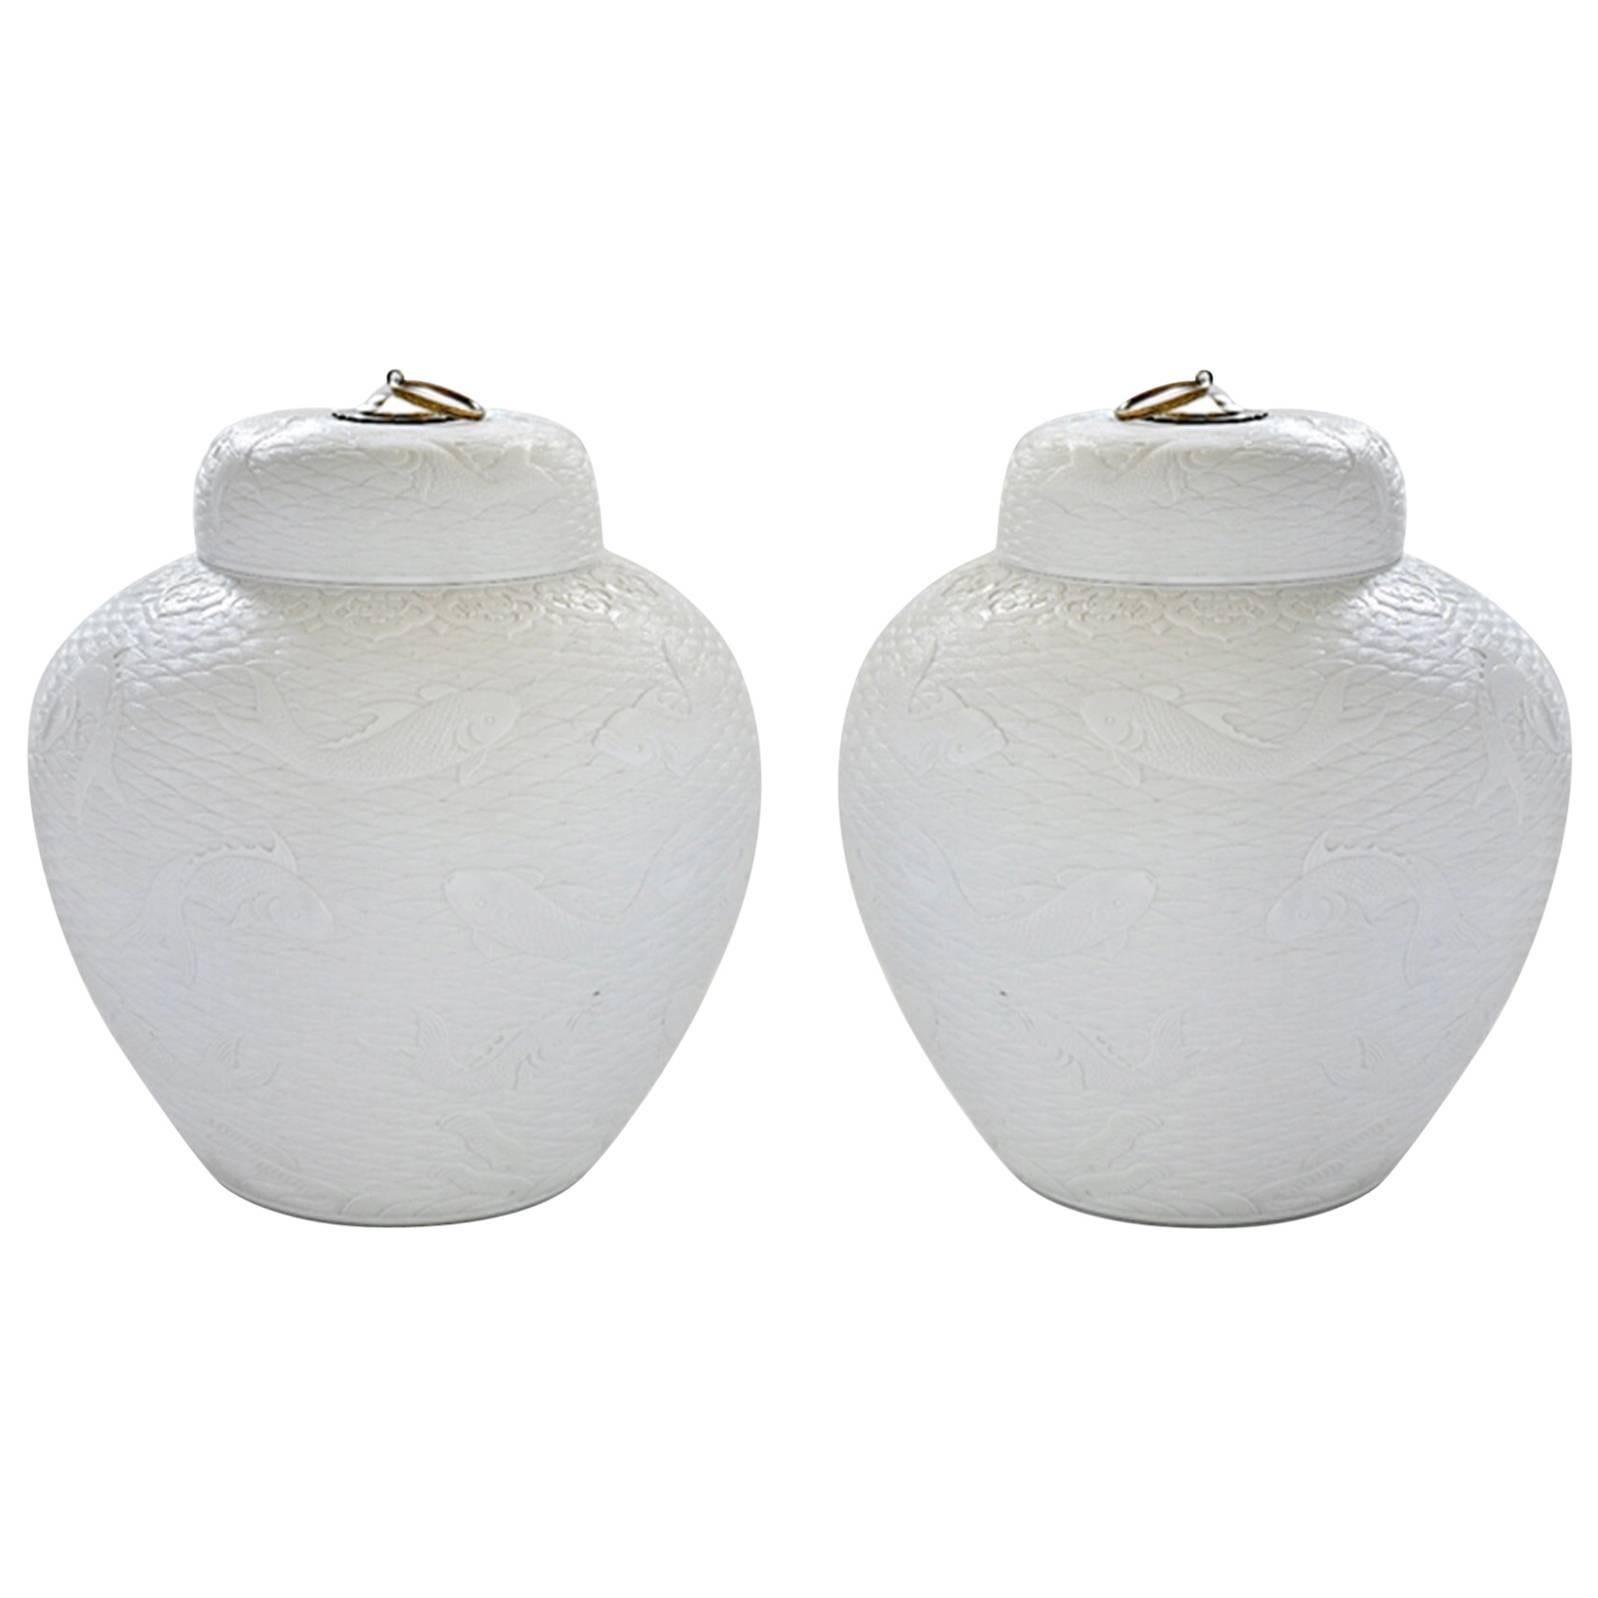 Pair of Fine Carved White Porcelain Jars with Covers 